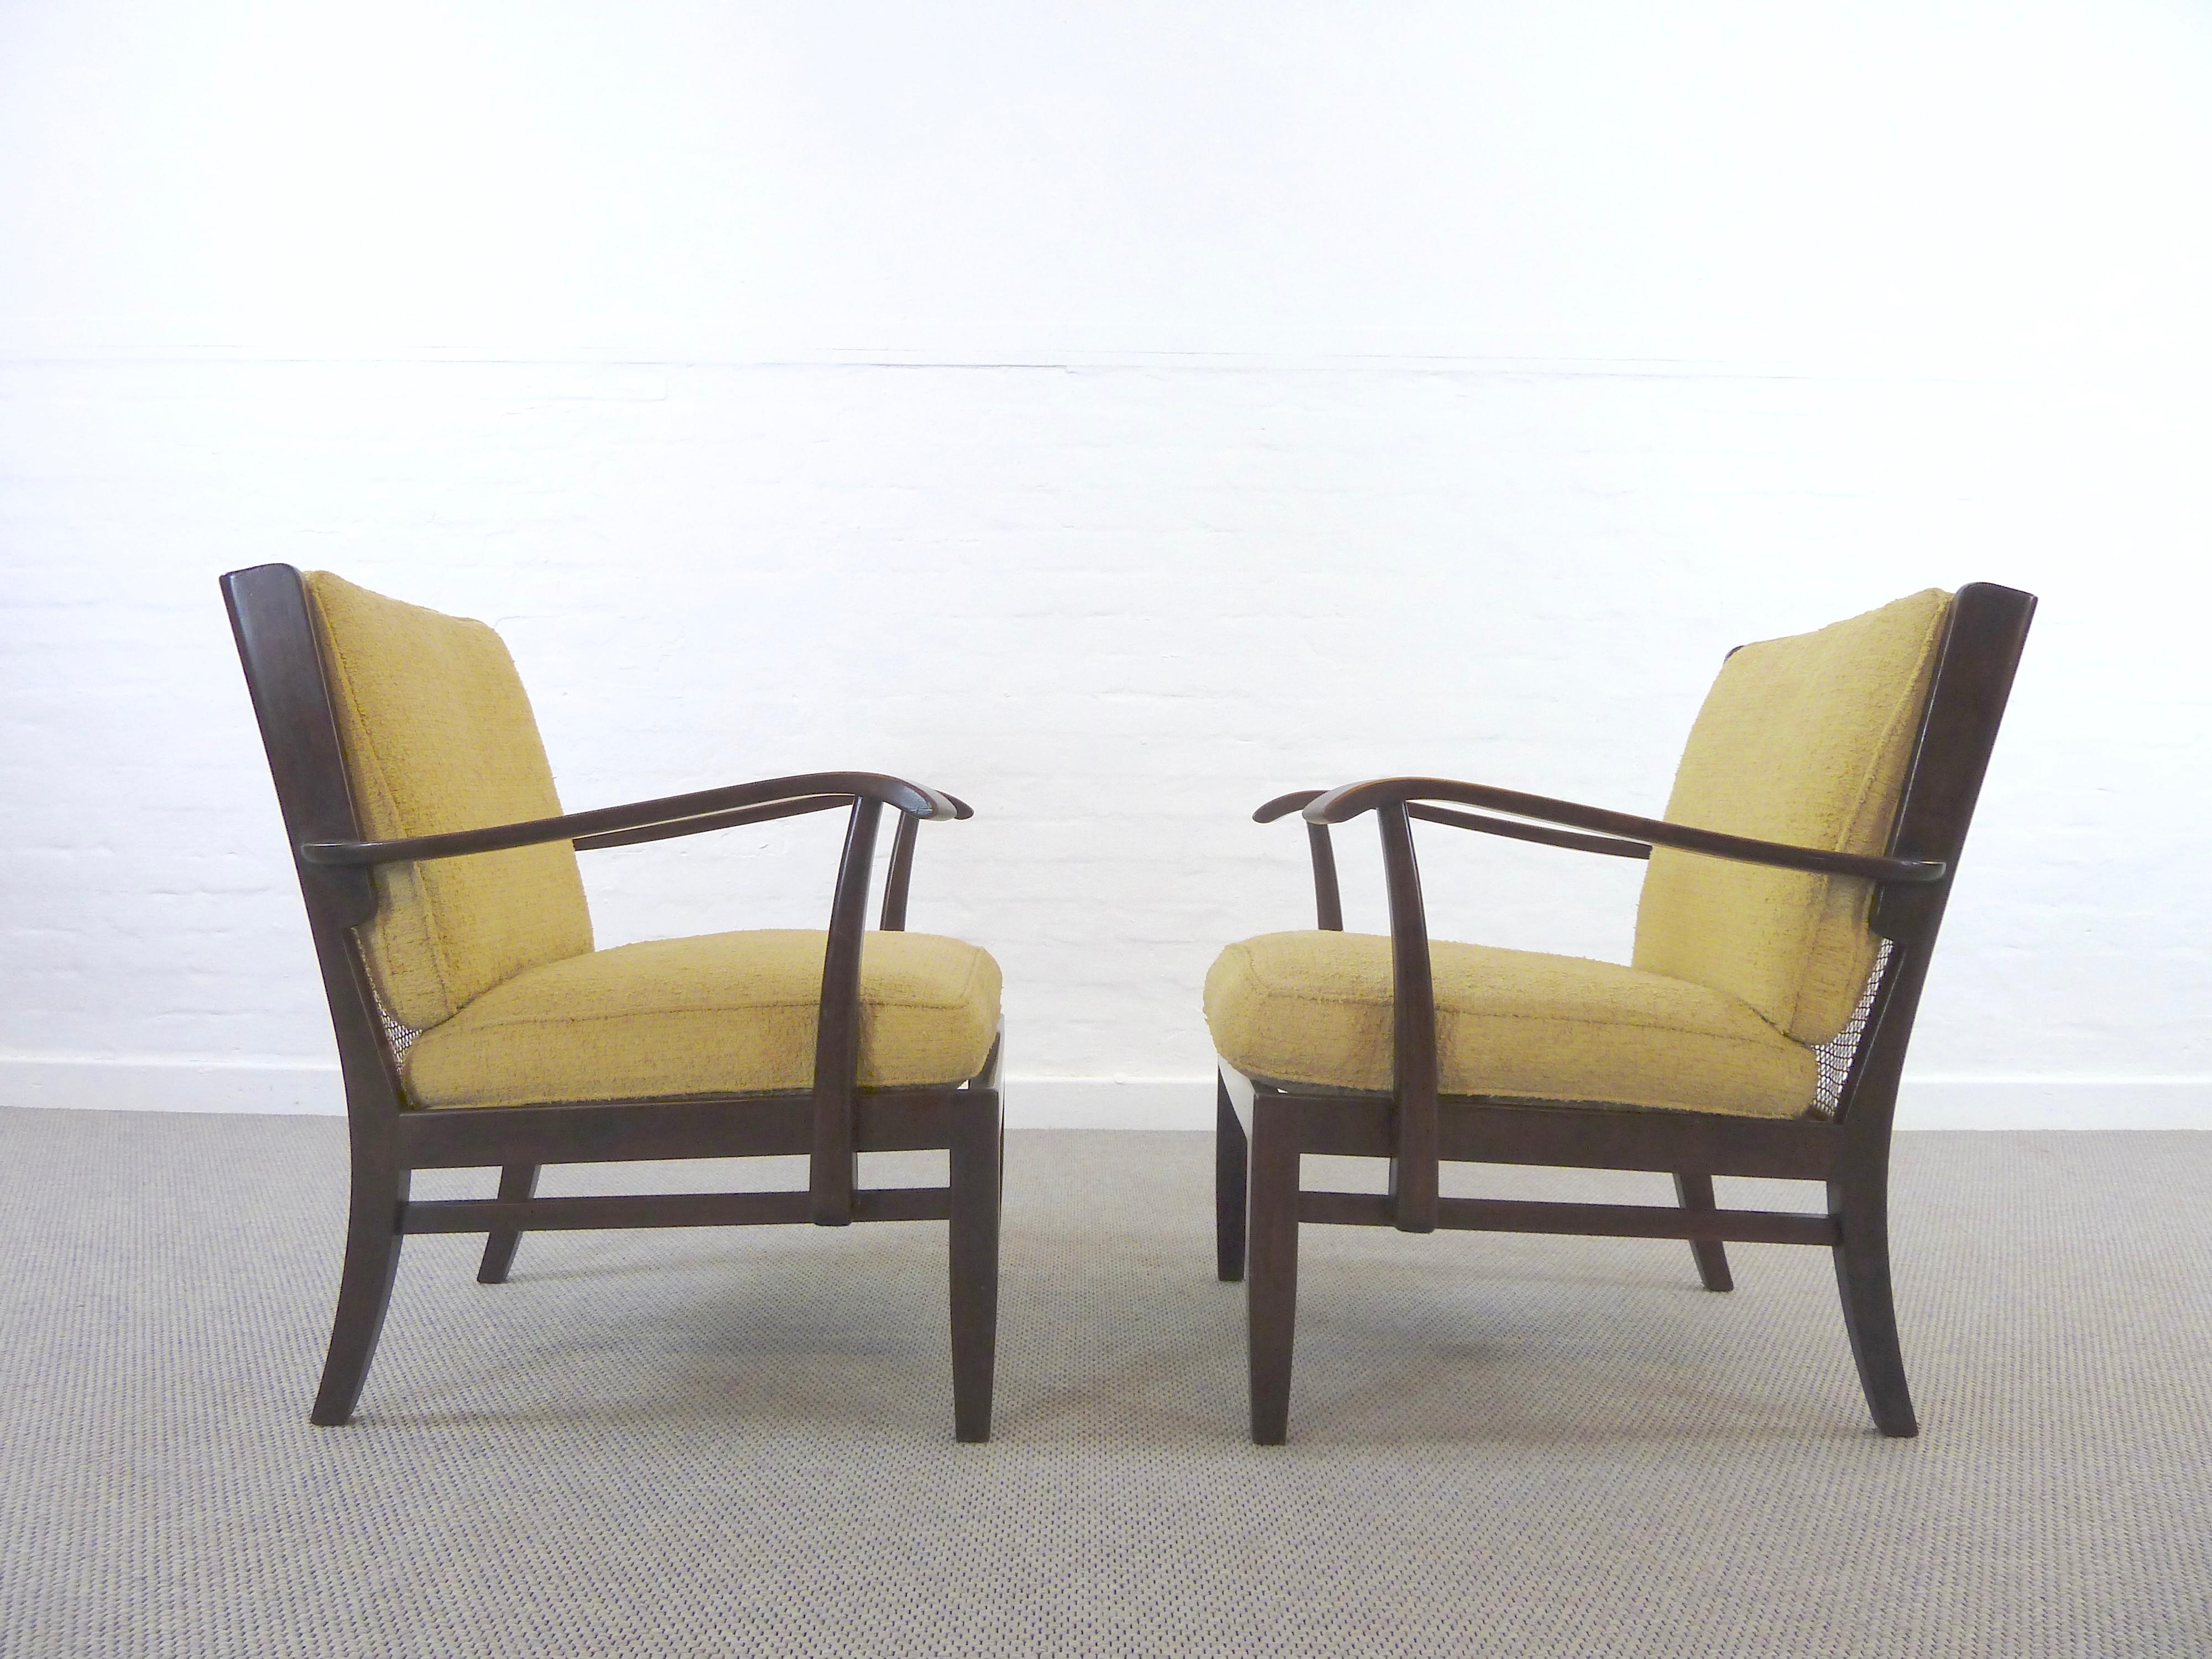 A rare and early elegant pair of armchairs from the 